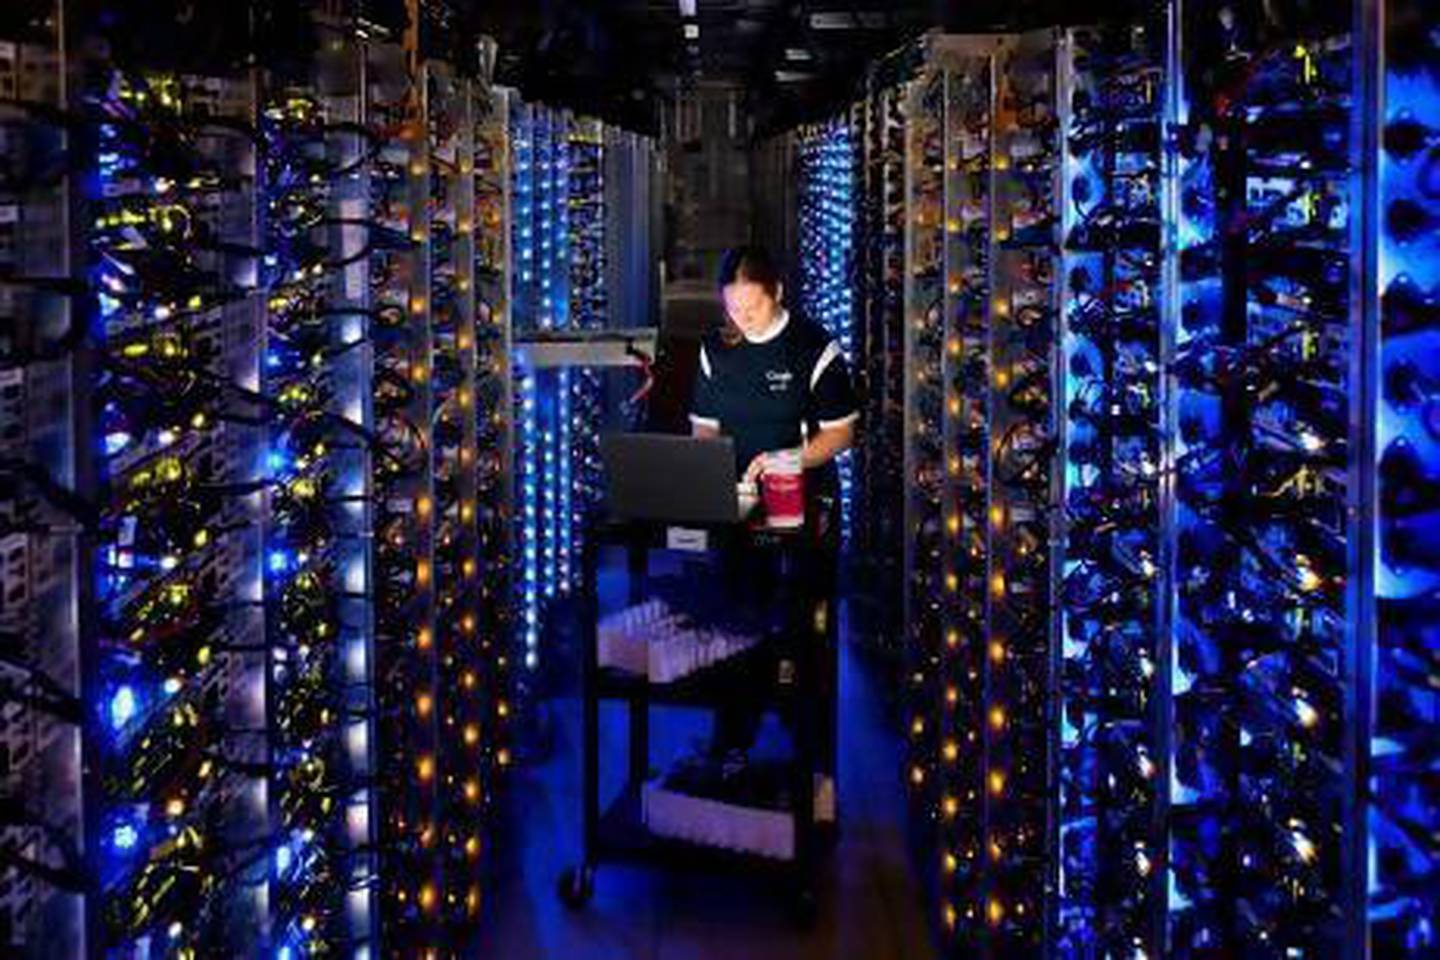 The Google data centre in Oregon, where the internet giant stores emails, photos, video and other information shared by its millions of users. AP